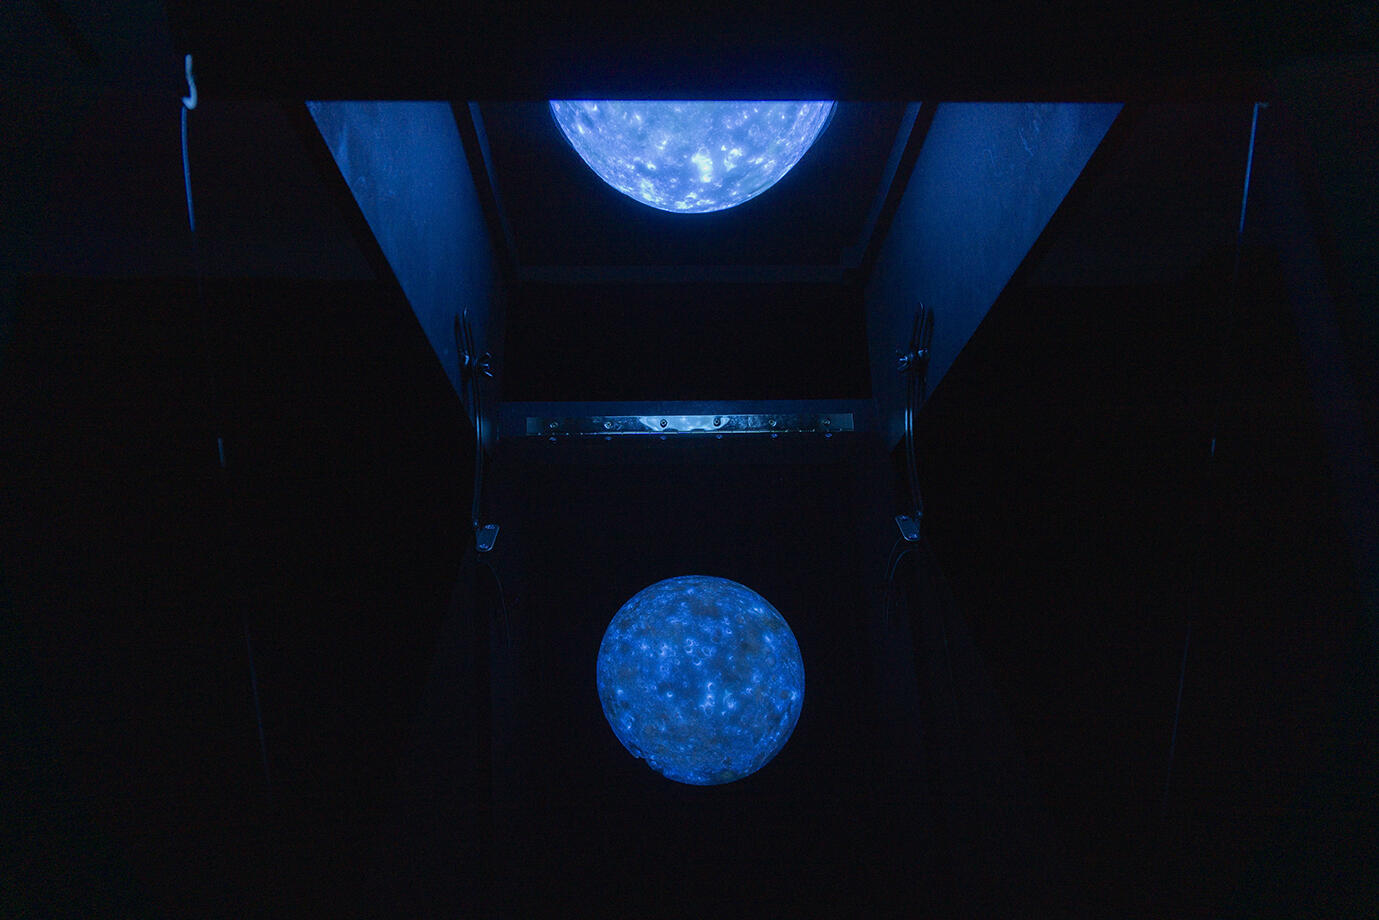 A fluorescent blue moon appears in a dark room, reflecting off an angled acrylic sheet, creating a captivating and ethereal visual effect.